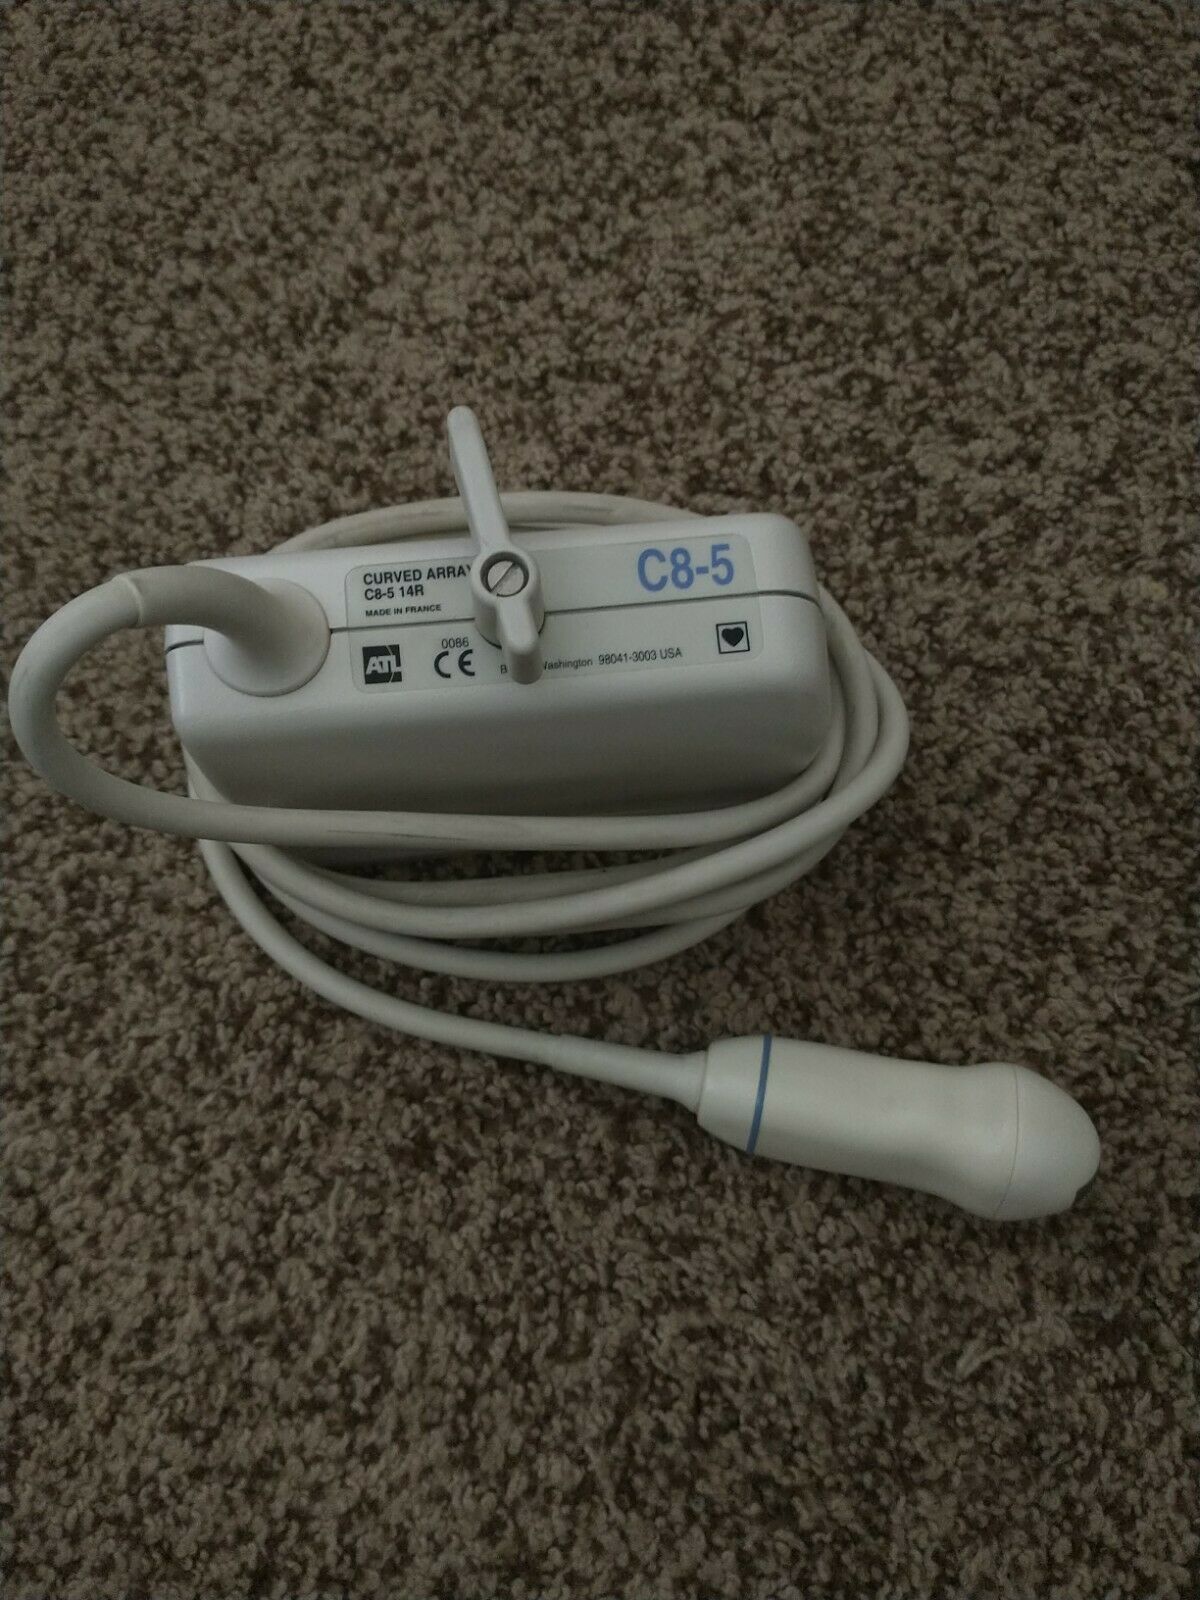 Philips (ATL) C8-5 Curved Array Ultrasound Transducer Probe DIAGNOSTIC ULTRASOUND MACHINES FOR SALE